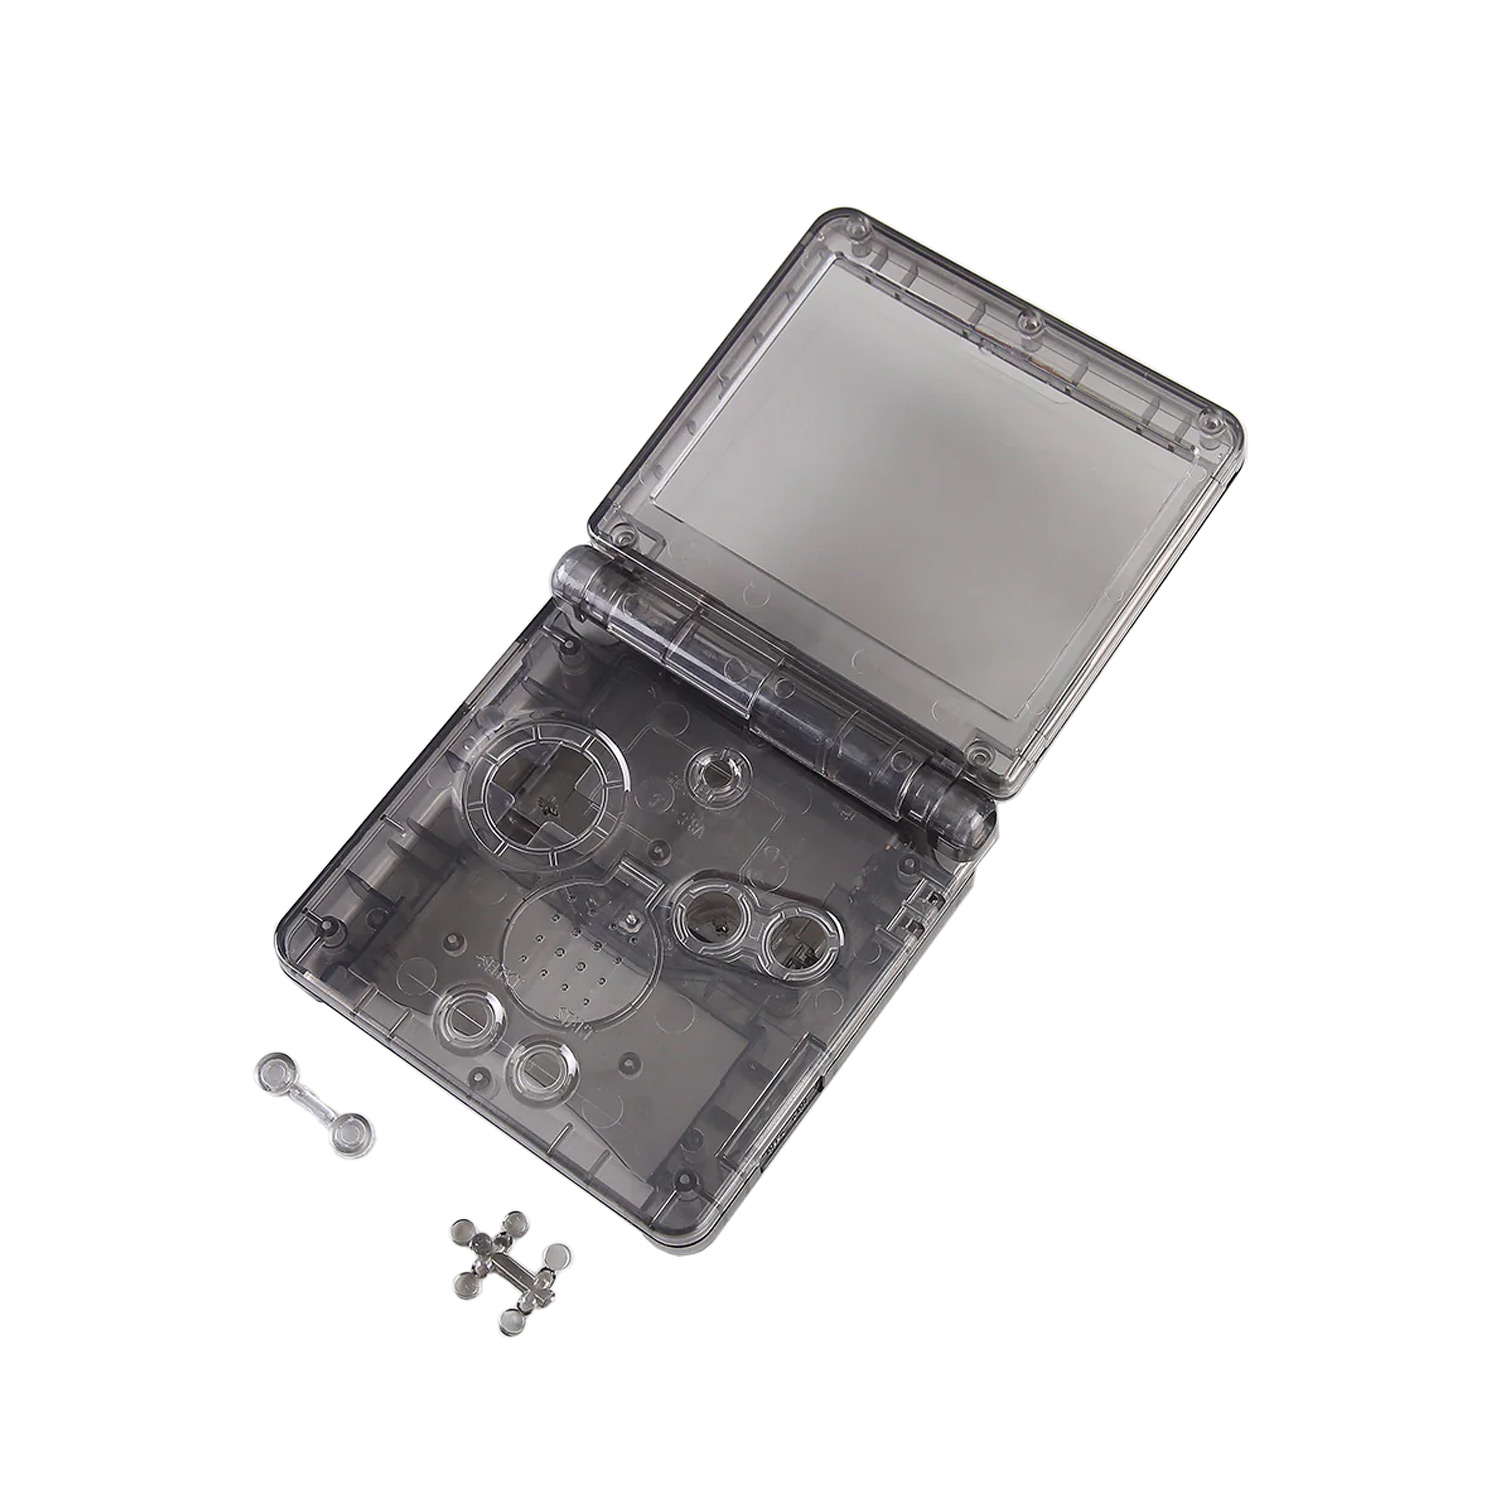 Shell (Mirror Clear Black) for Game Boy Advance SP